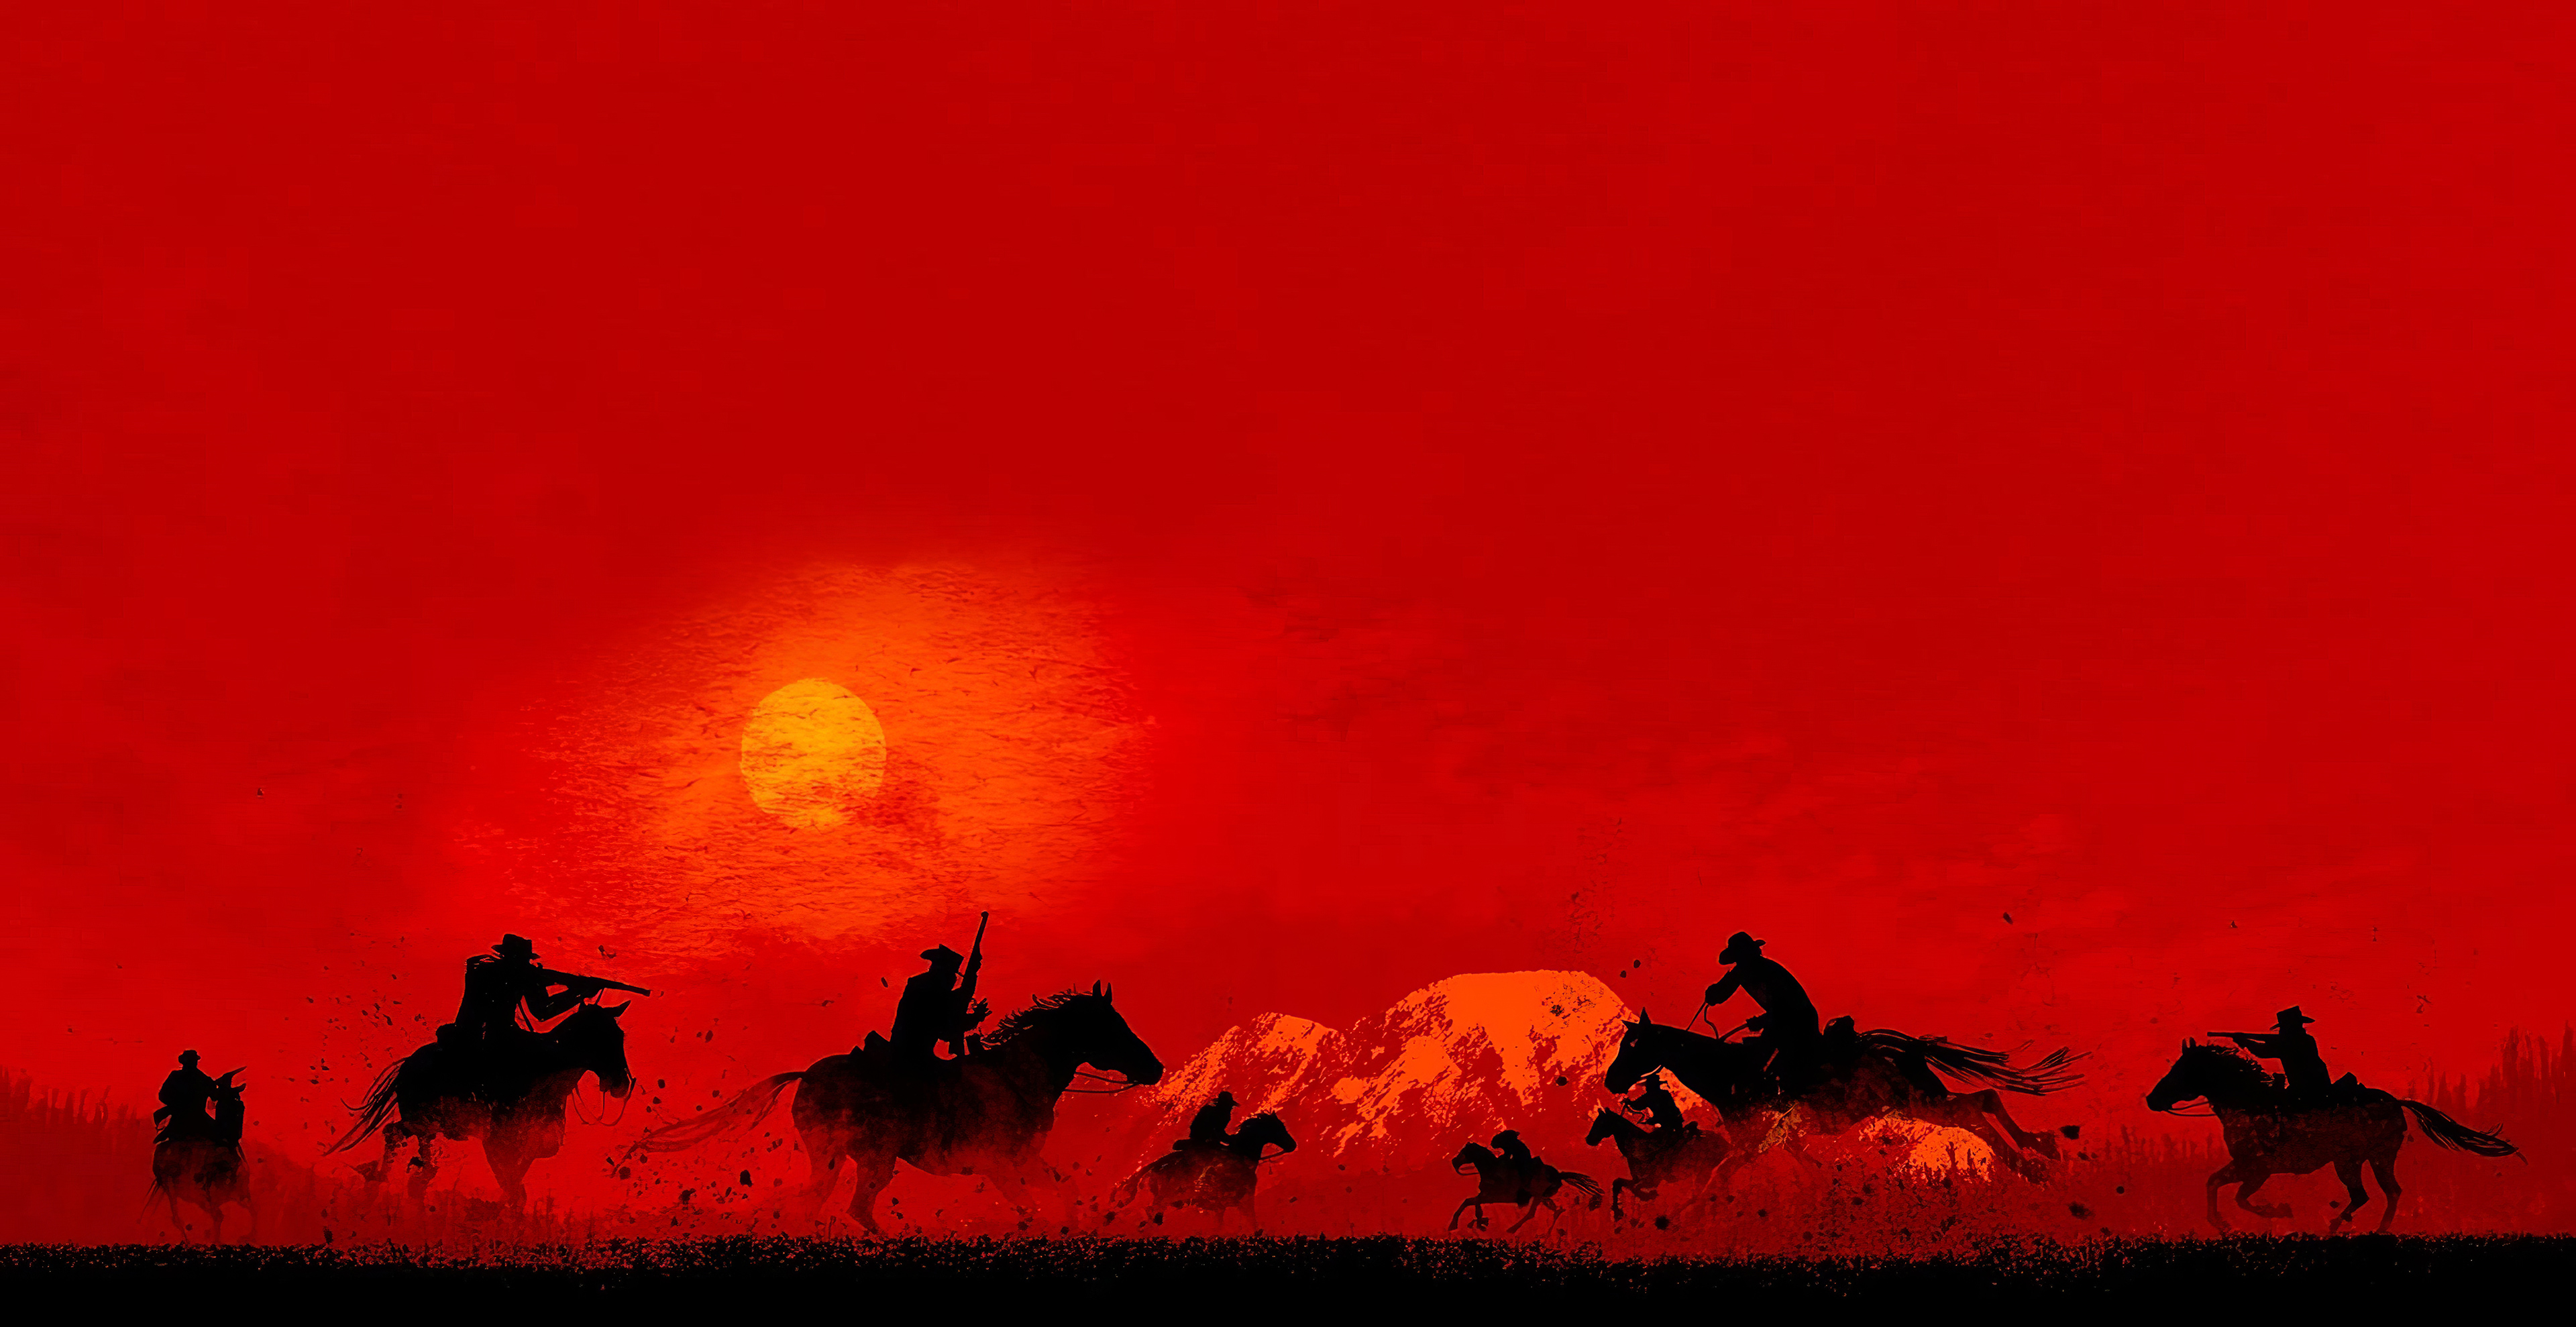 Red Dead Redemption 2 Game 2019 Wallpaper Hd Games 4k Wallpapers